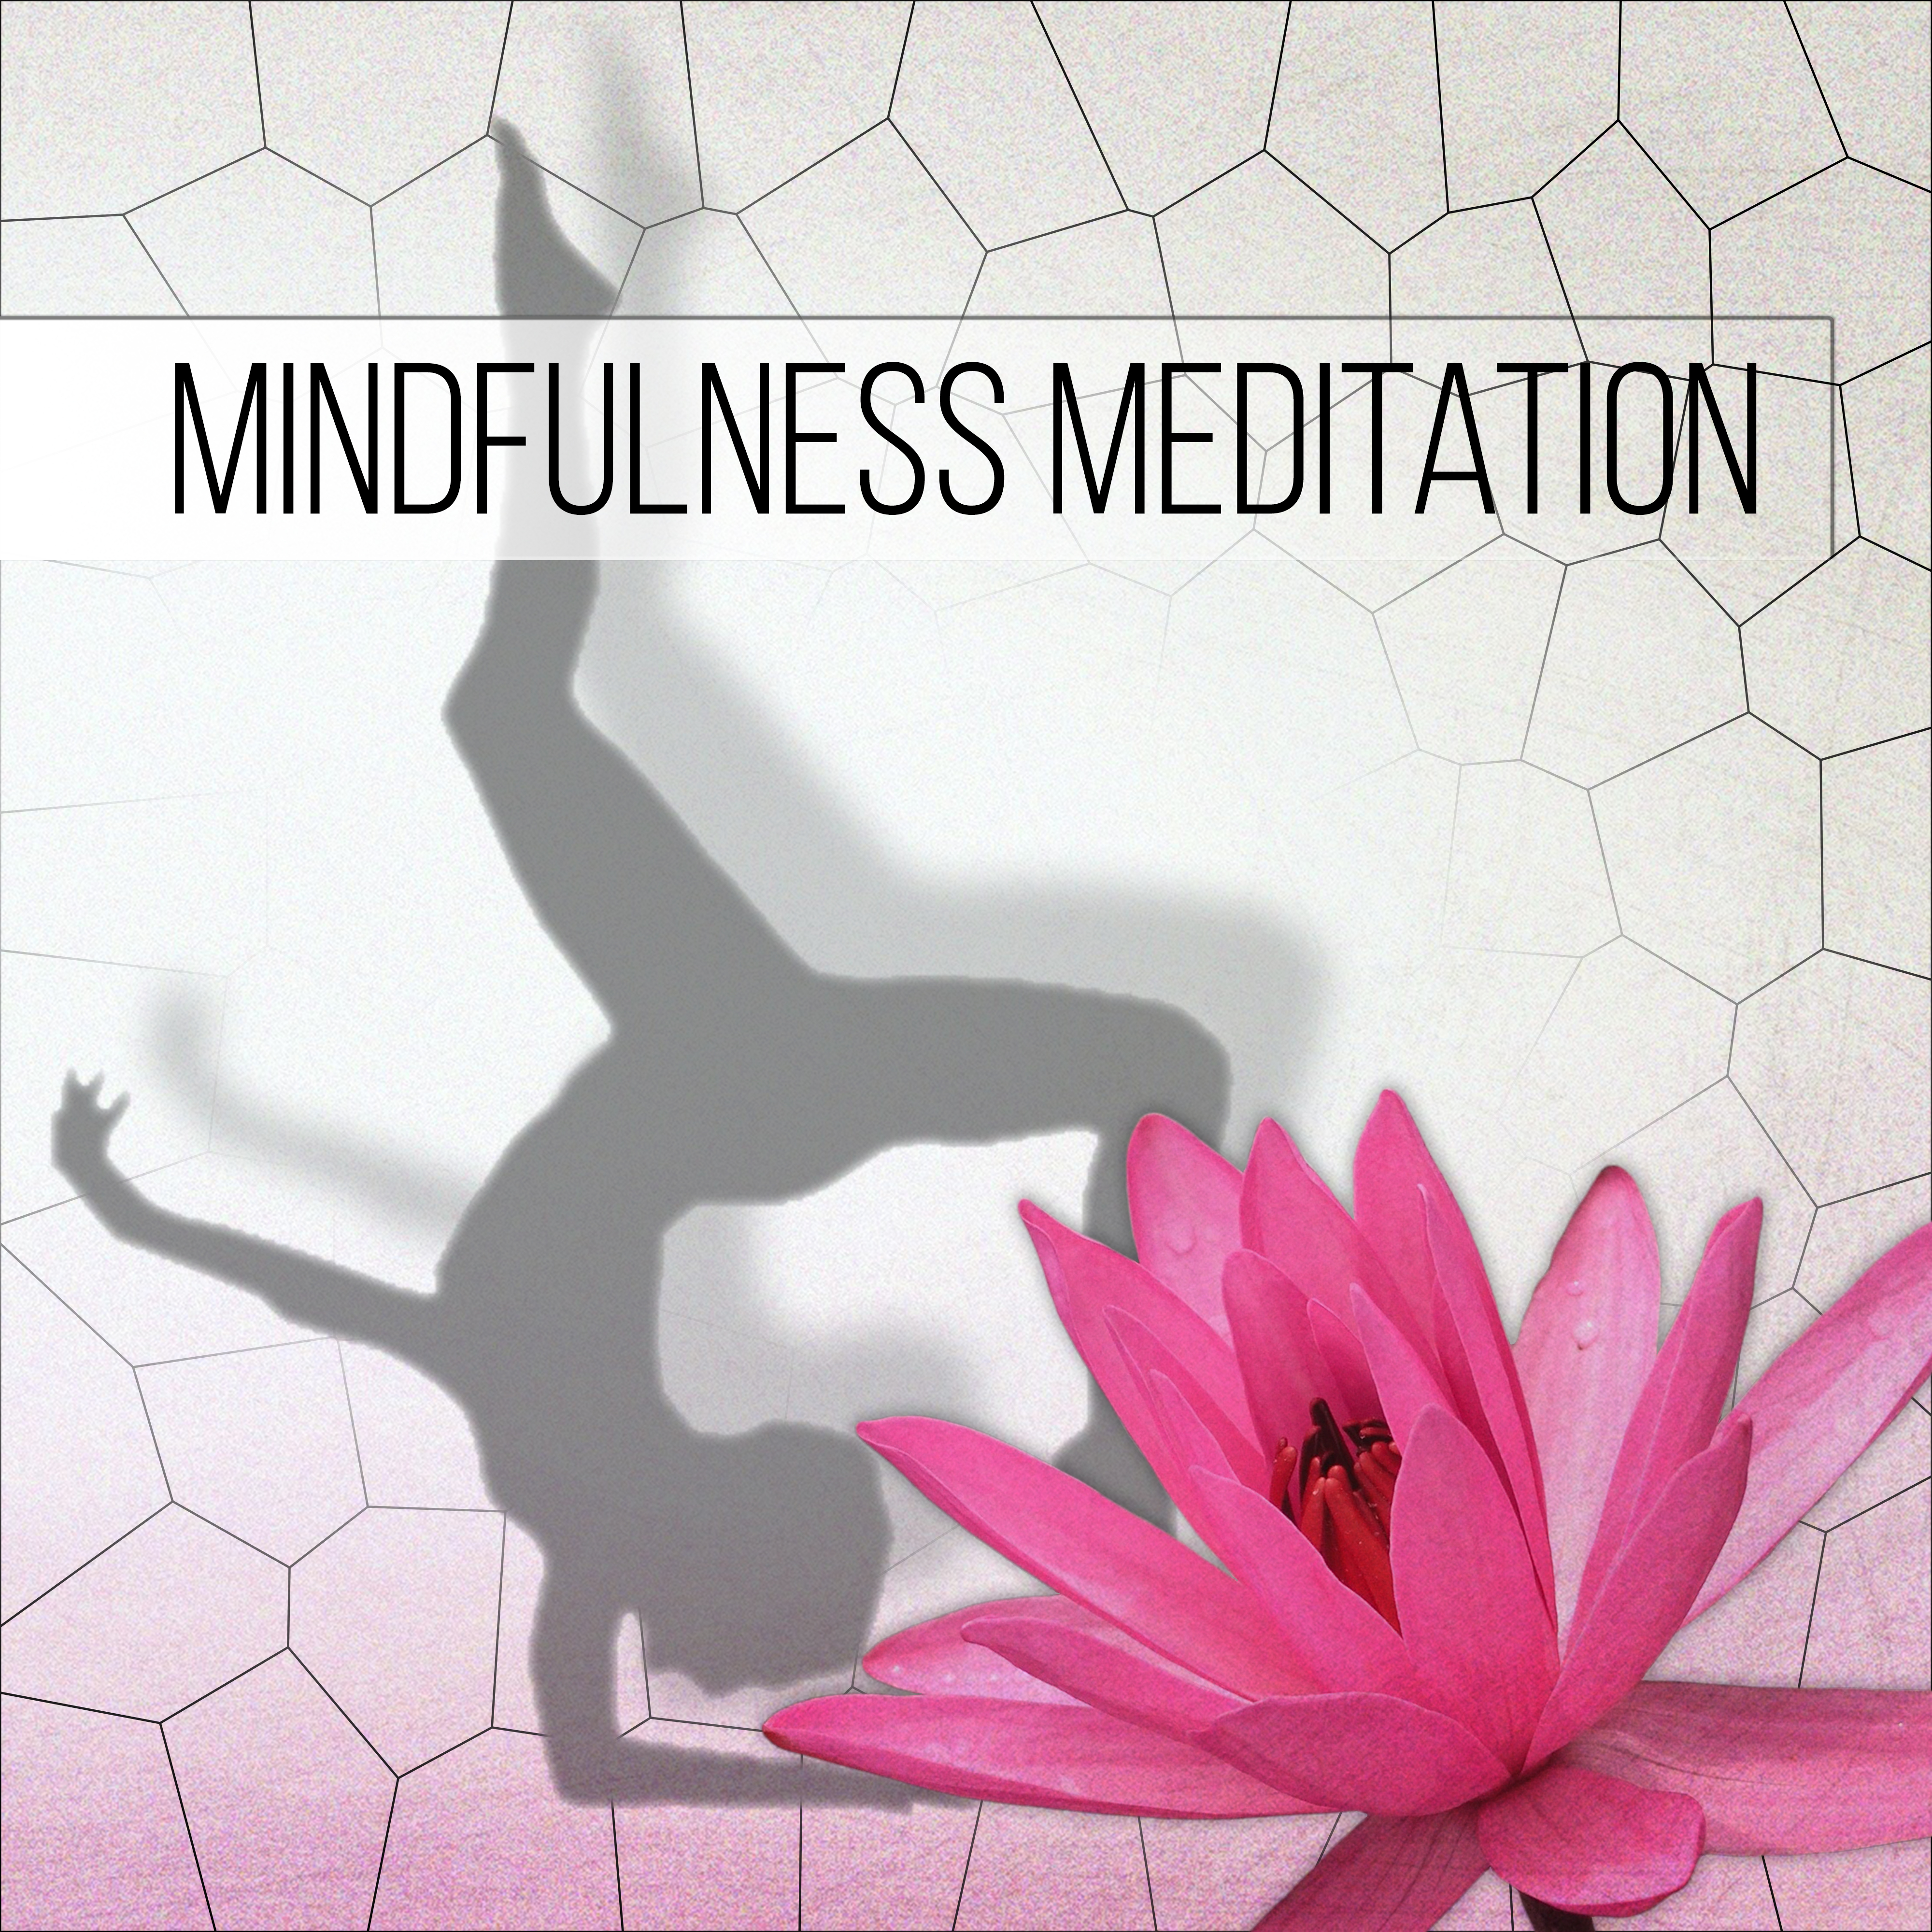 Mindfulness Meditation - Healing Meditation Music, Relaxing Nature Sounds for Massage, Spa, Yoga Music Therapy